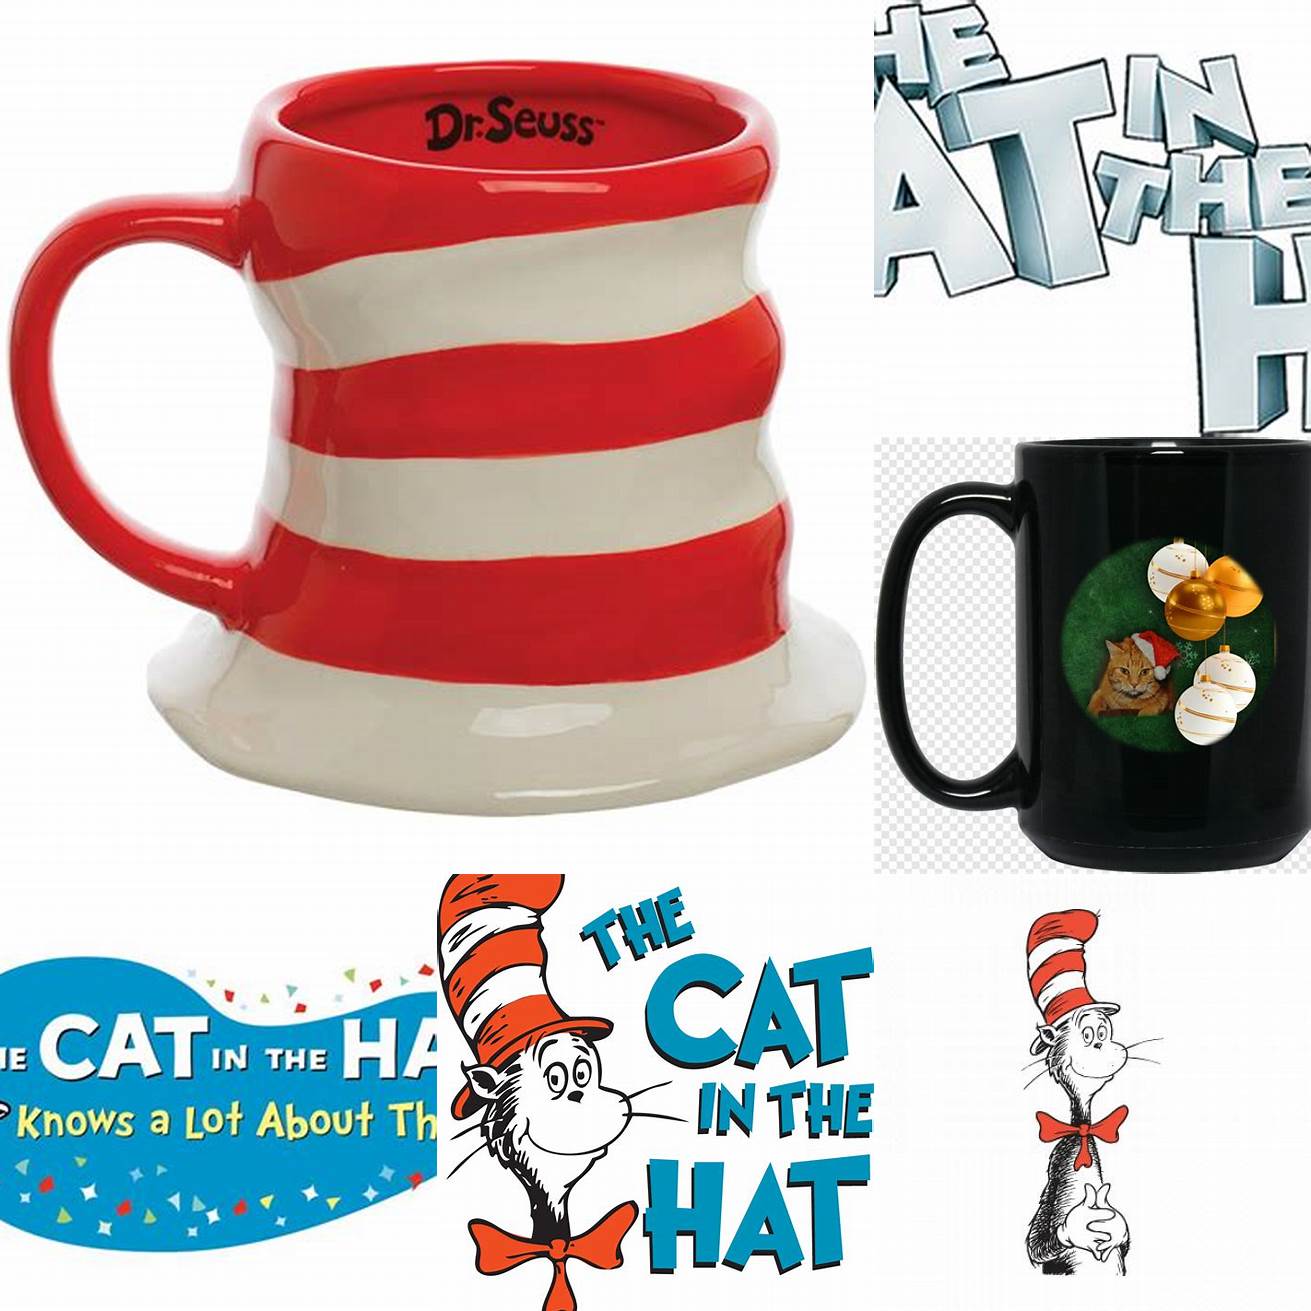 The Cat in the Hat Logo on a Coffee Mug